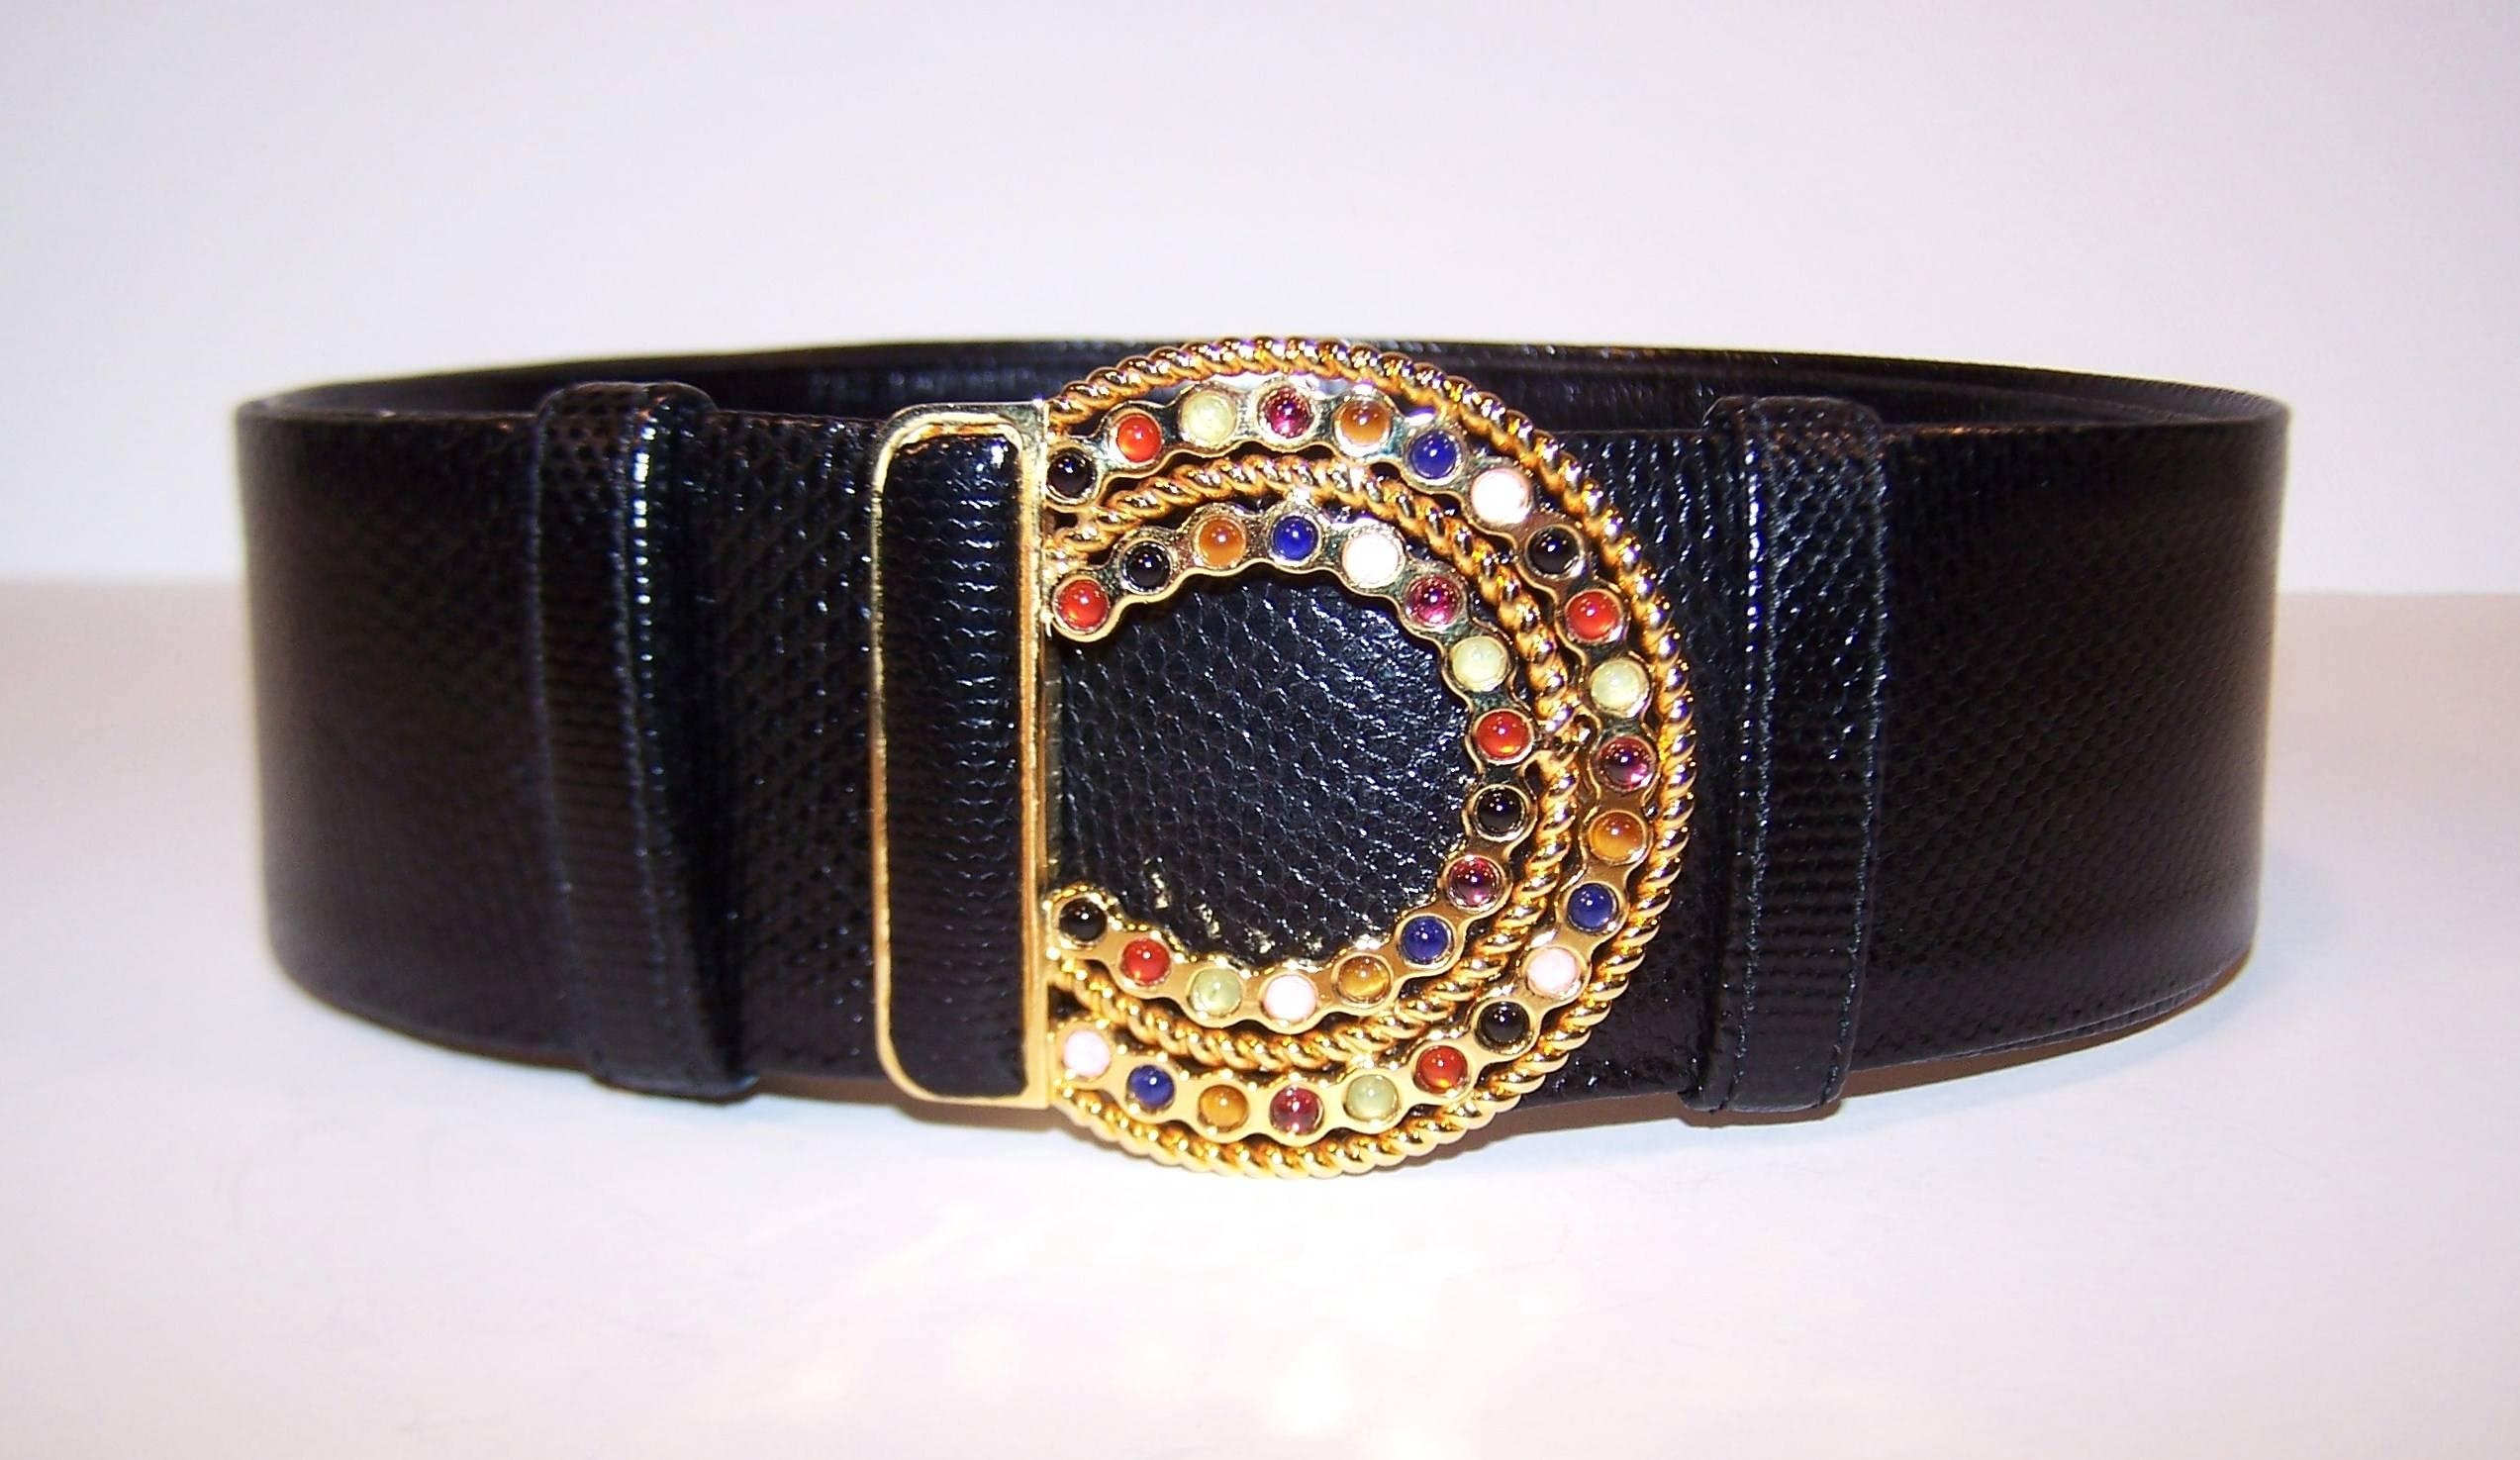 C.1990 Judith Leiber Black Lizard Belt With Cabochon Bejeweled Buckle 1